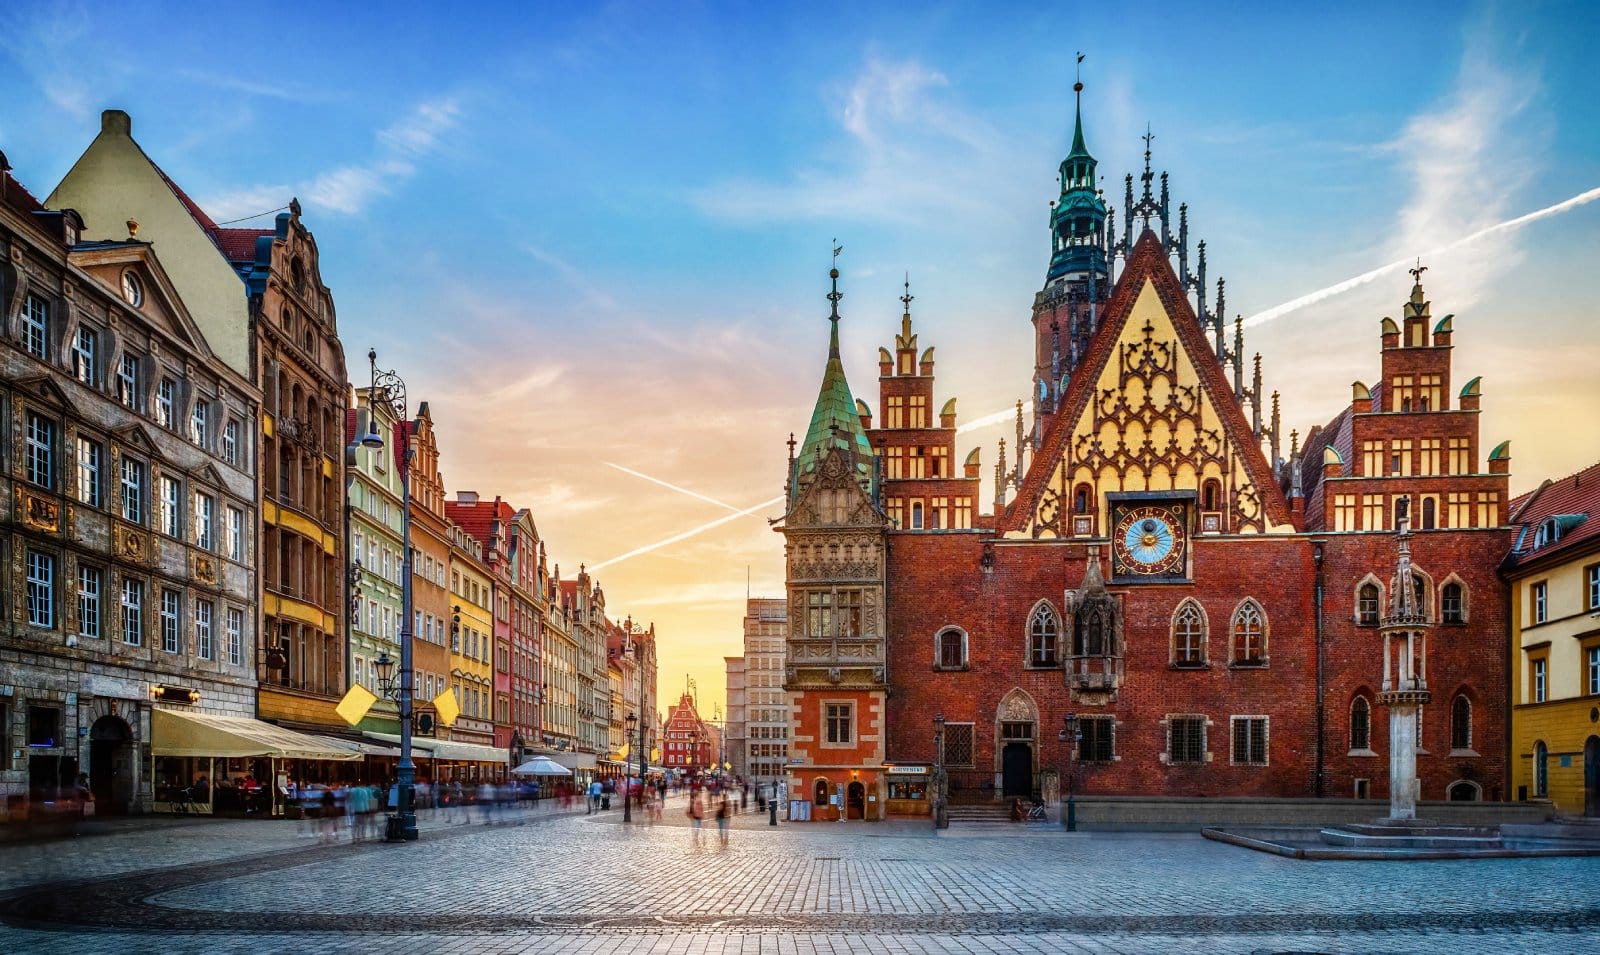 <p class="wp-caption-text">Image Credit: Shutterstock / Triff</p>  <p><span>Wroclaw’s market square, Rynek, features colorful buildings and is home to the famous dwarf statues. Poland is known for its safety, making it an ideal destination for first-time international travelers. The city’s architecture and friendly locals are highlights.</span></p>